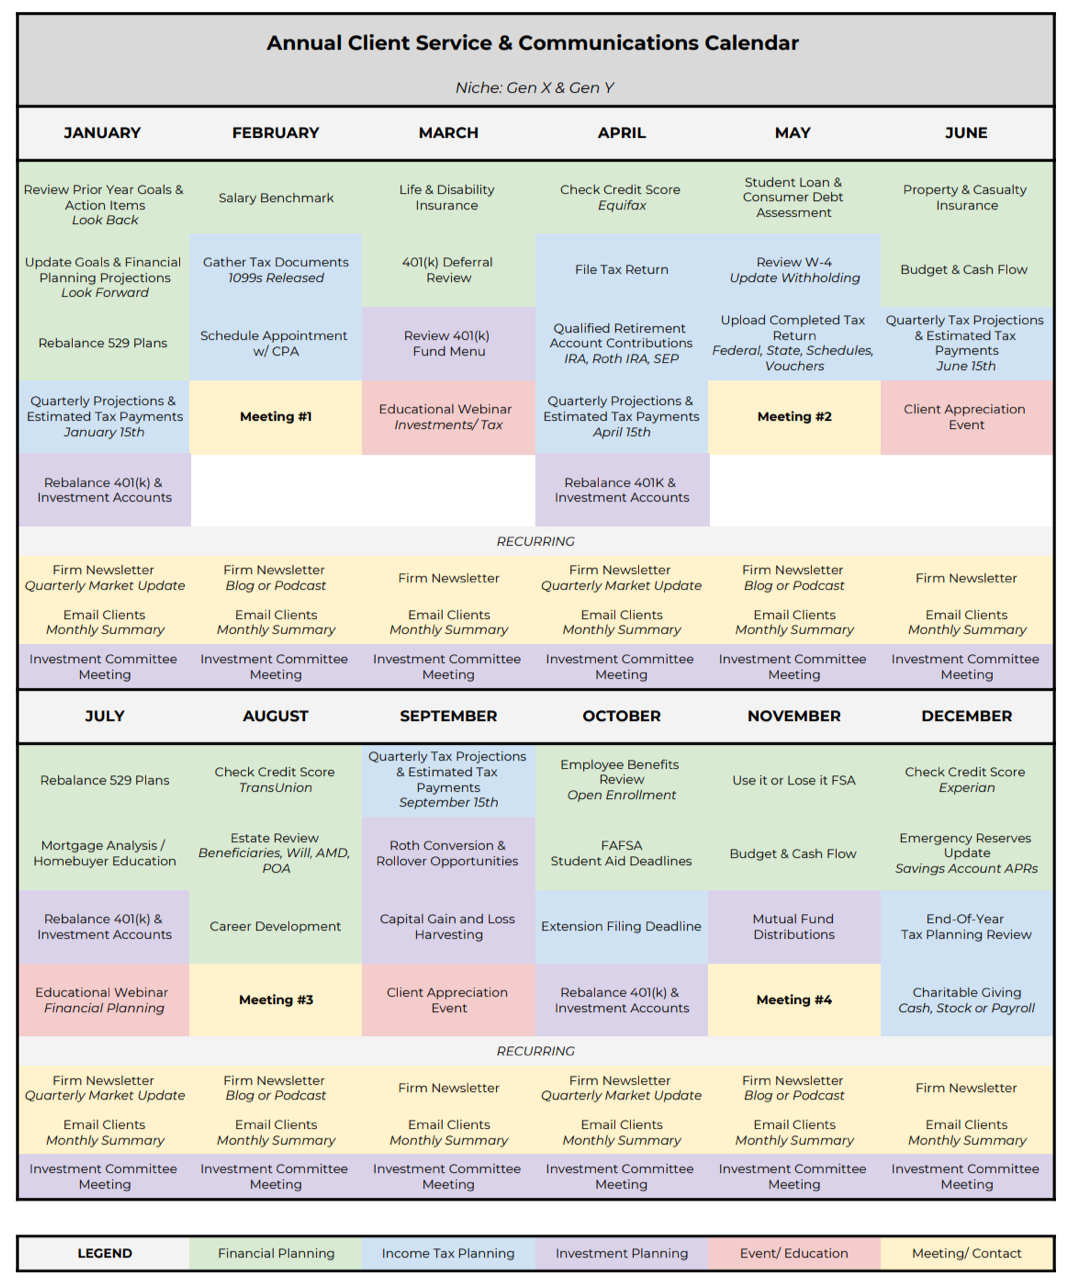 Annual Client Service and Communications Calendar